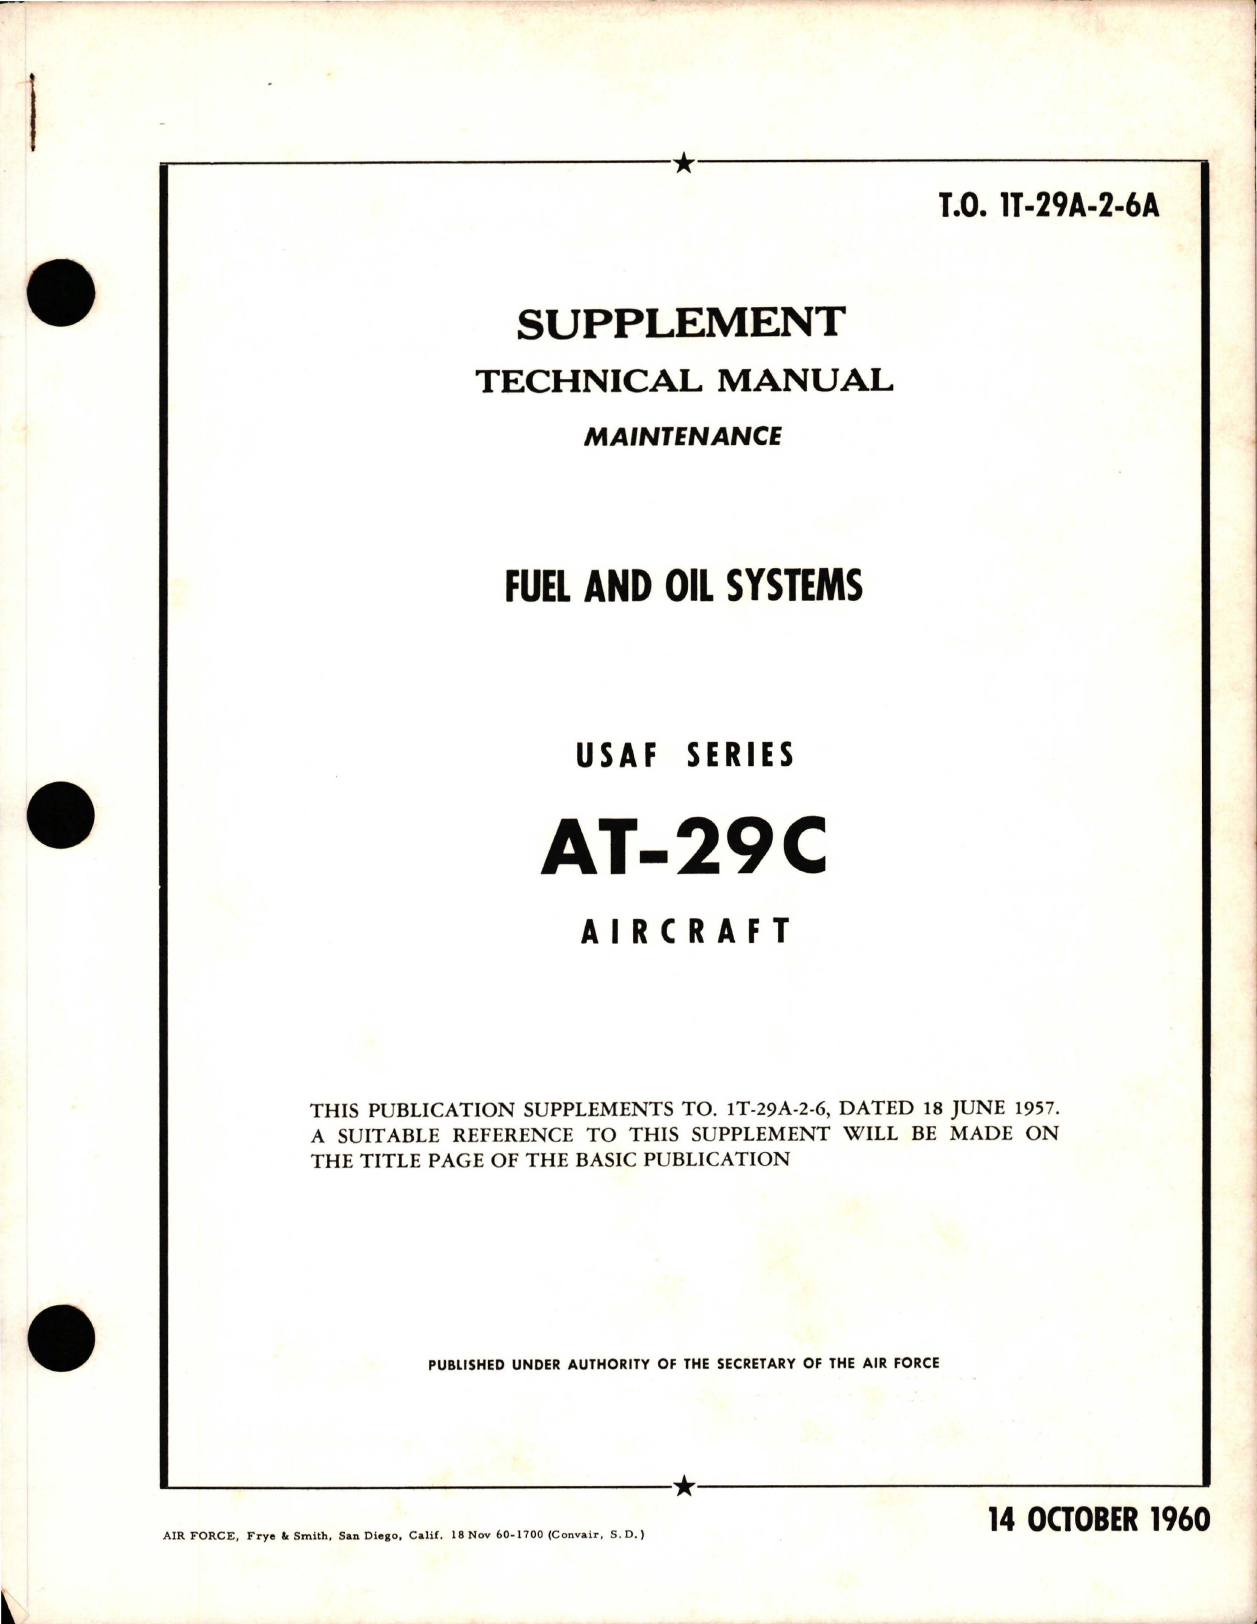 Sample page 1 from AirCorps Library document: Supplement to Maintenance for Fuel and Oil Systems for AT-29C